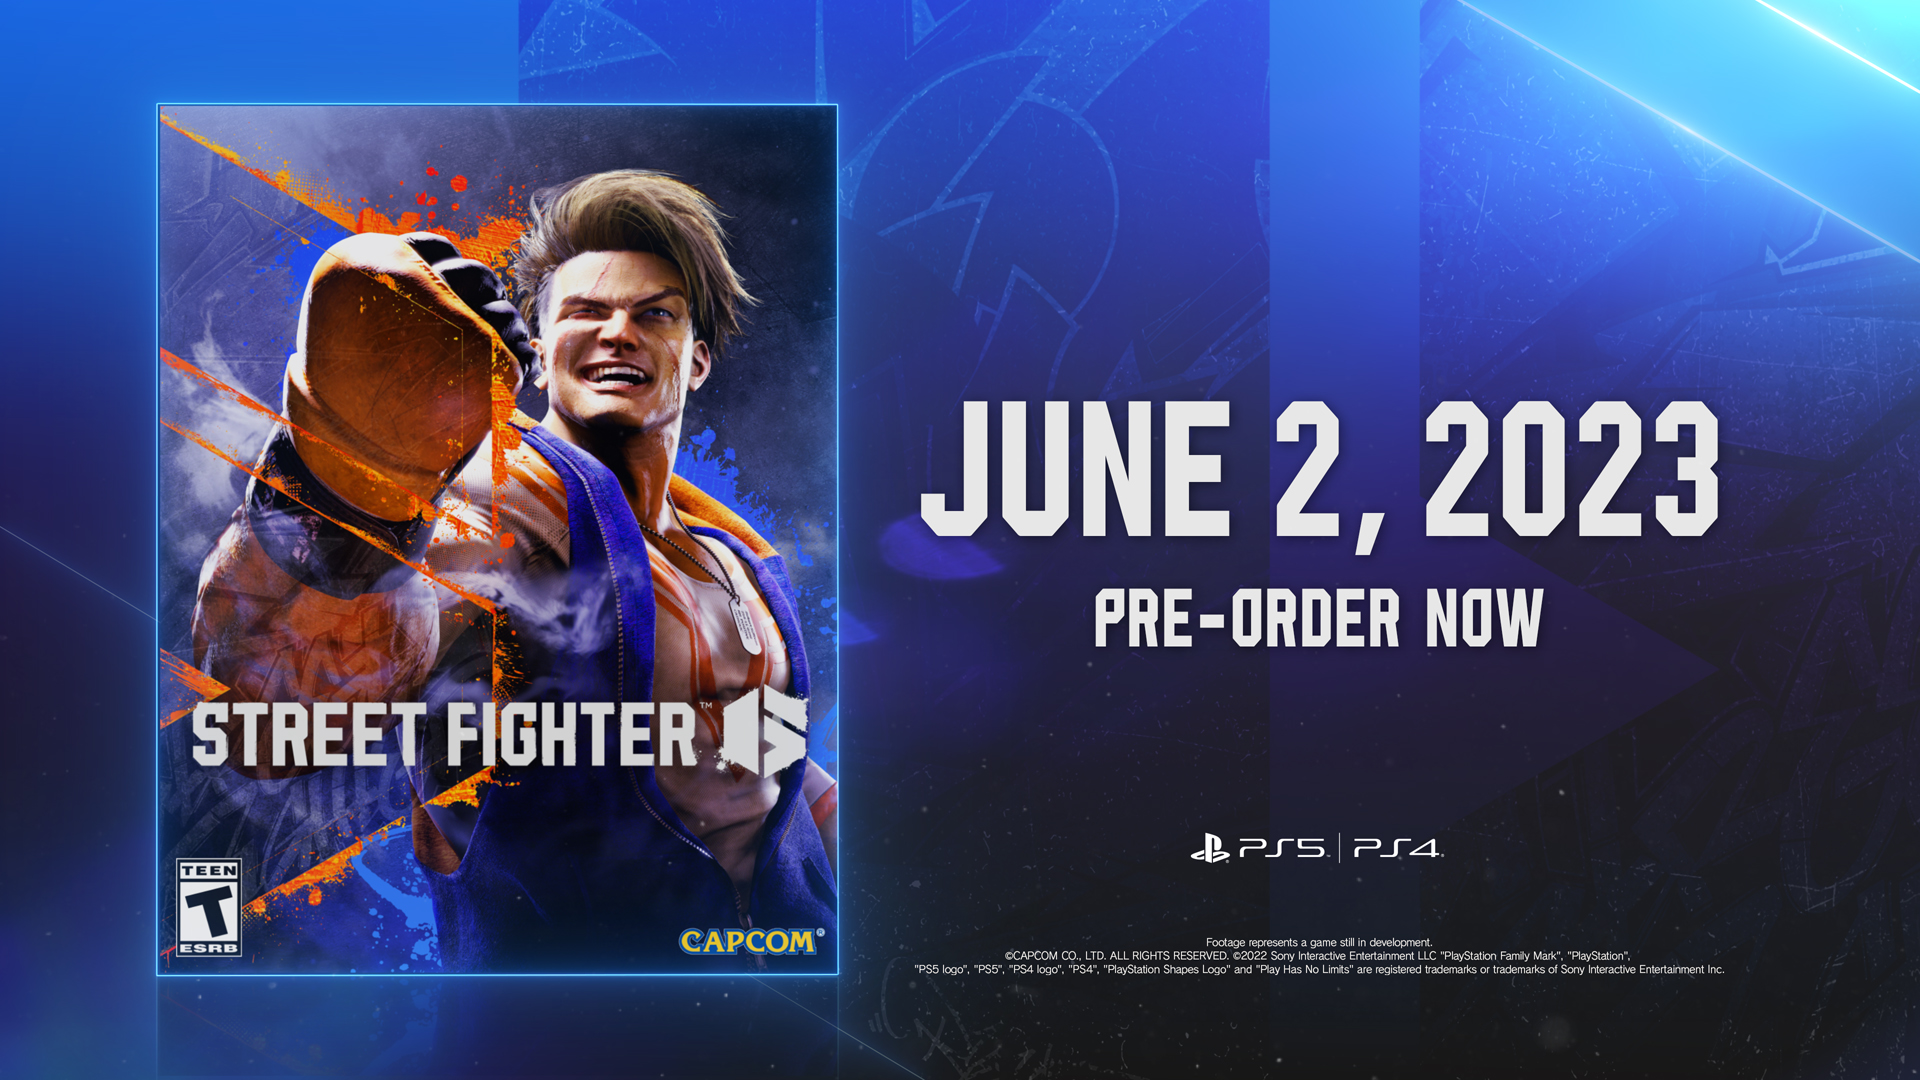 Street Fighter 6 launches June 2, 2023 –